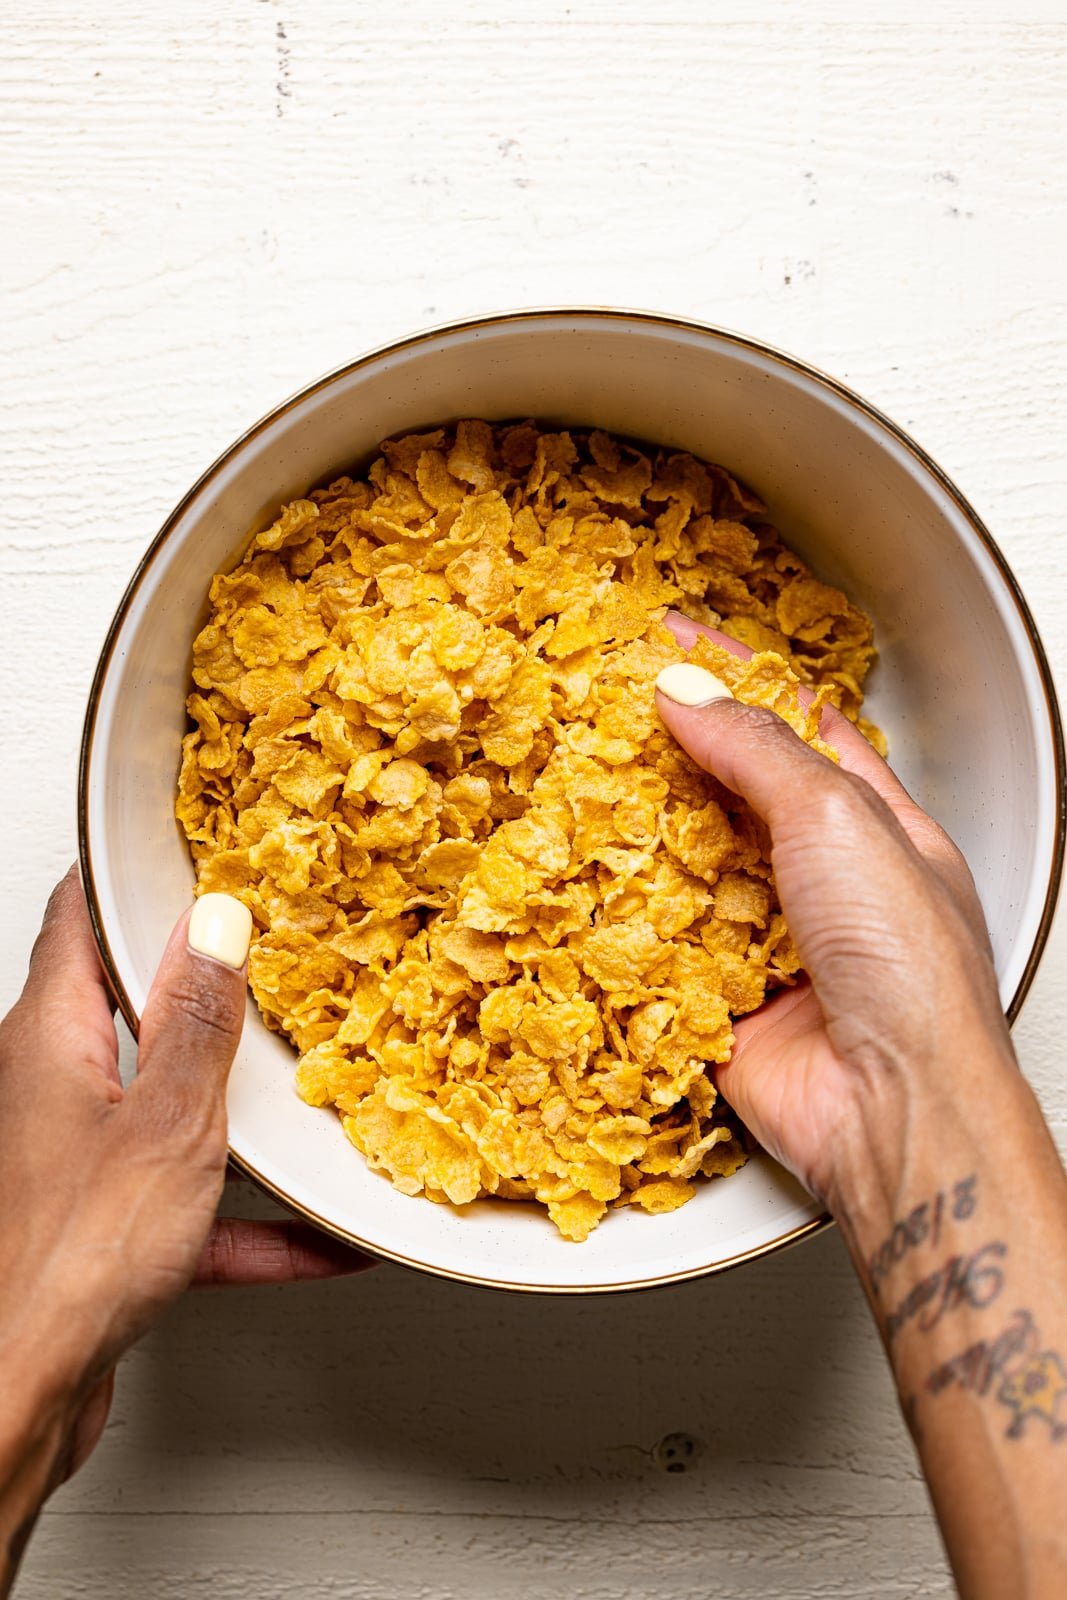 Crushed cornflakes in a white bowl on a white table being held.